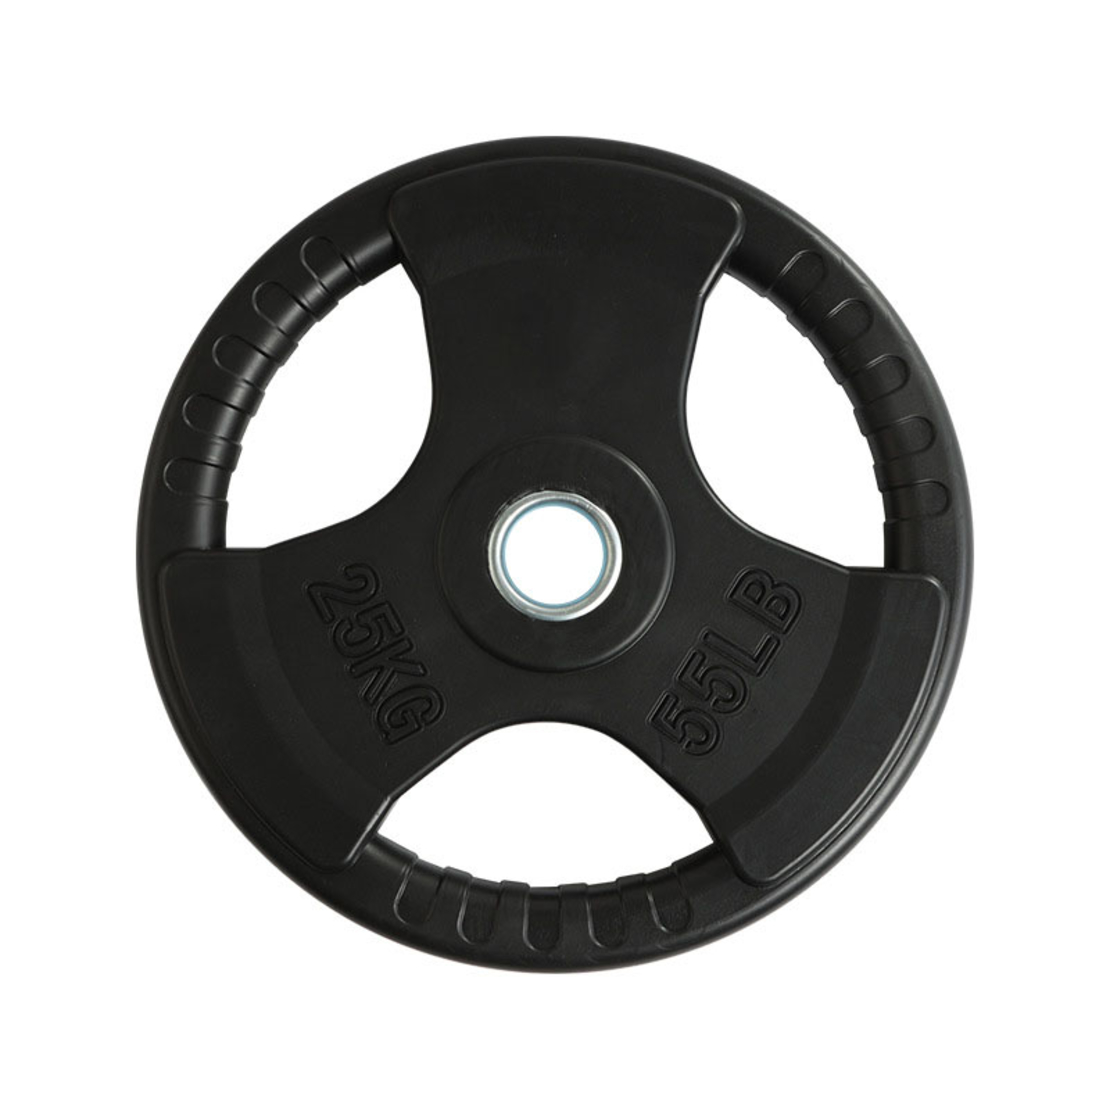  weight plate 2.5kg